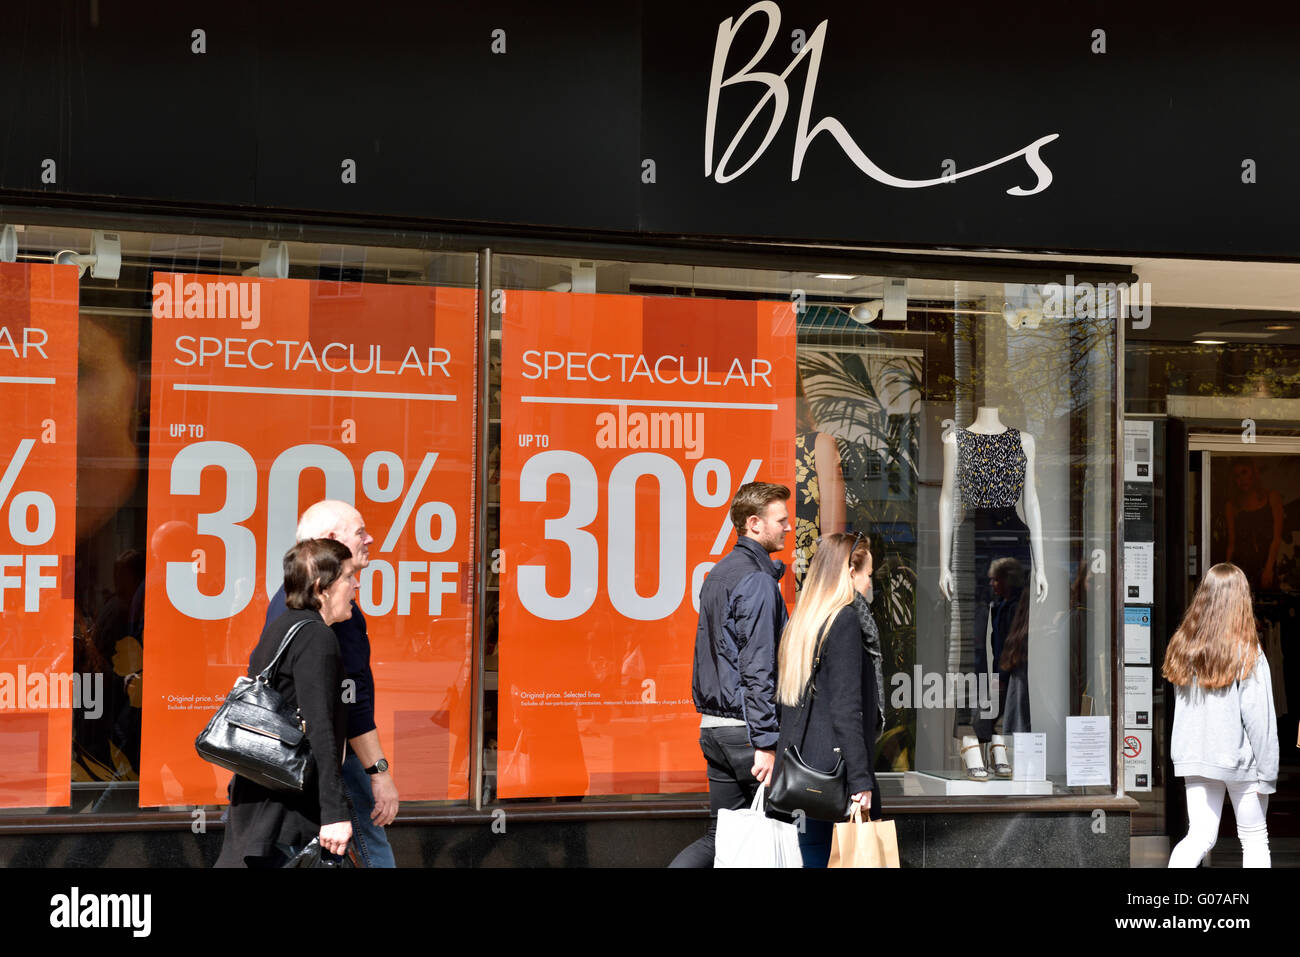 British Home Stores, BHS, Bristol Broadmead, UK, 30 April, 2016. With financial difficulties leading to collapse and administration the national chain of stores has sale on throughout stores. Store front of the Bristol Broadmead branch. “Credit: CHARLES STIRLING/Alamy Live News” Stock Photo